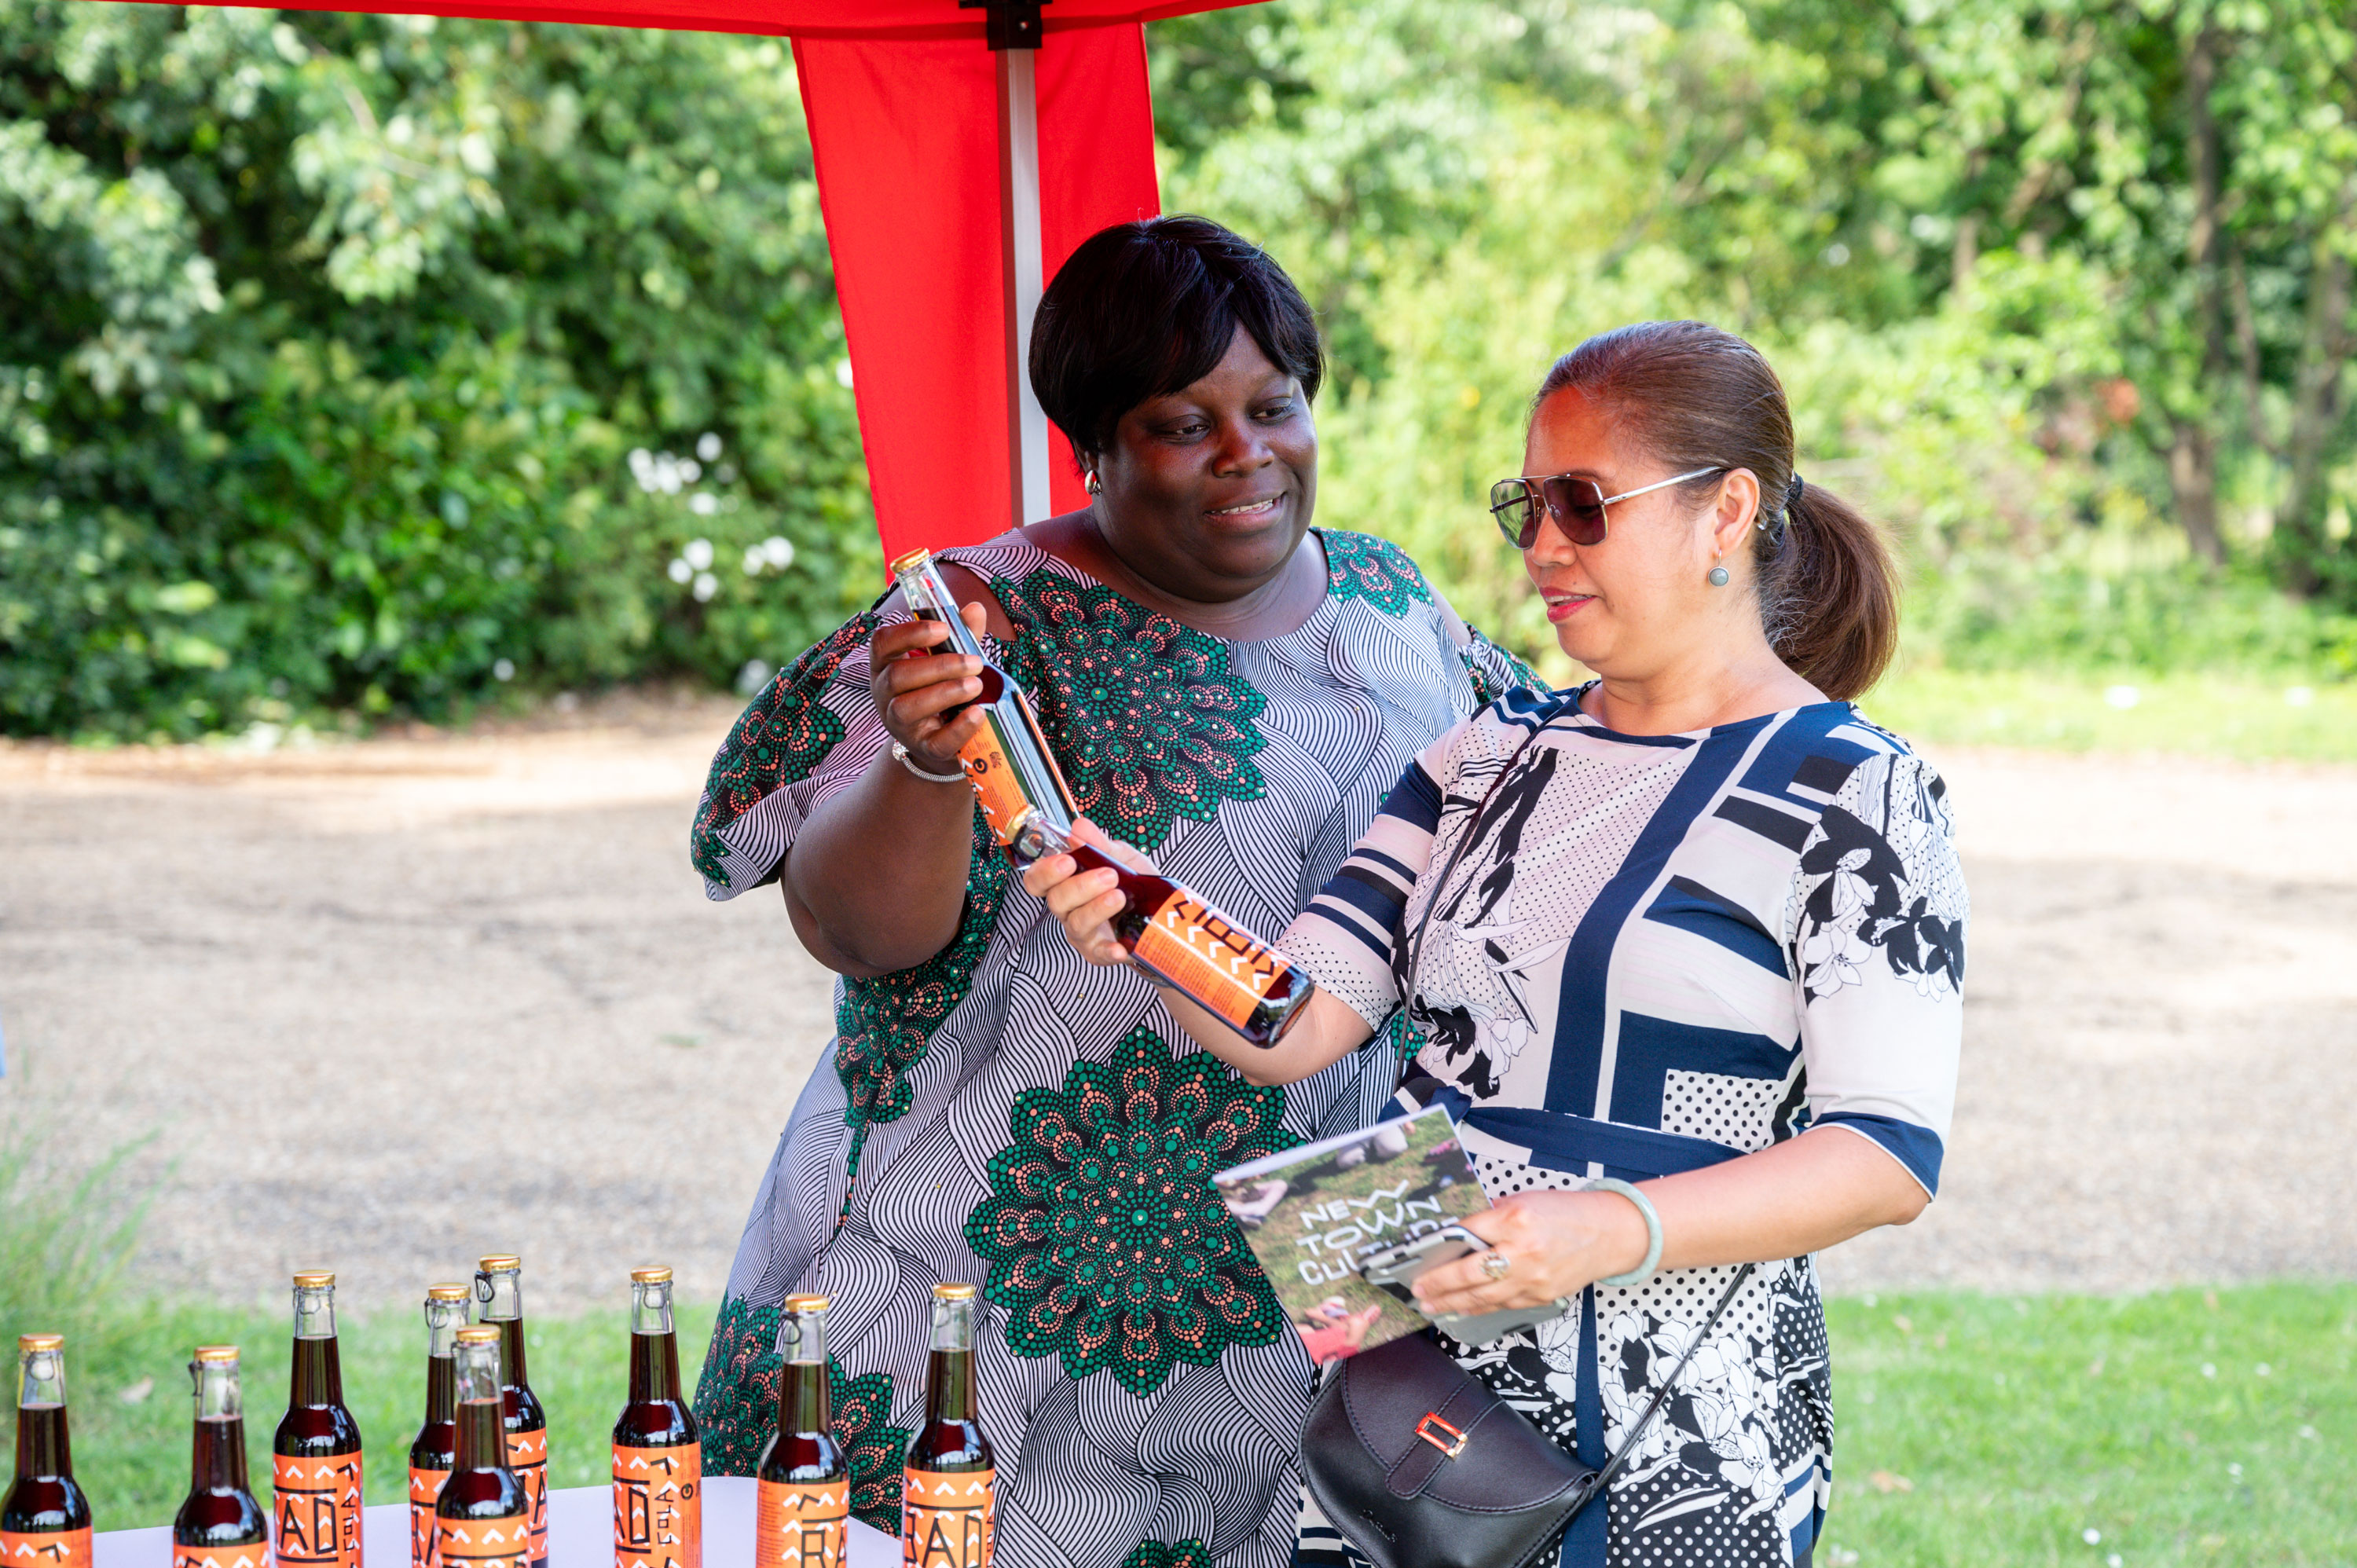 Two women smiling and looking at drinks bottles outside and underneath a gazeboo